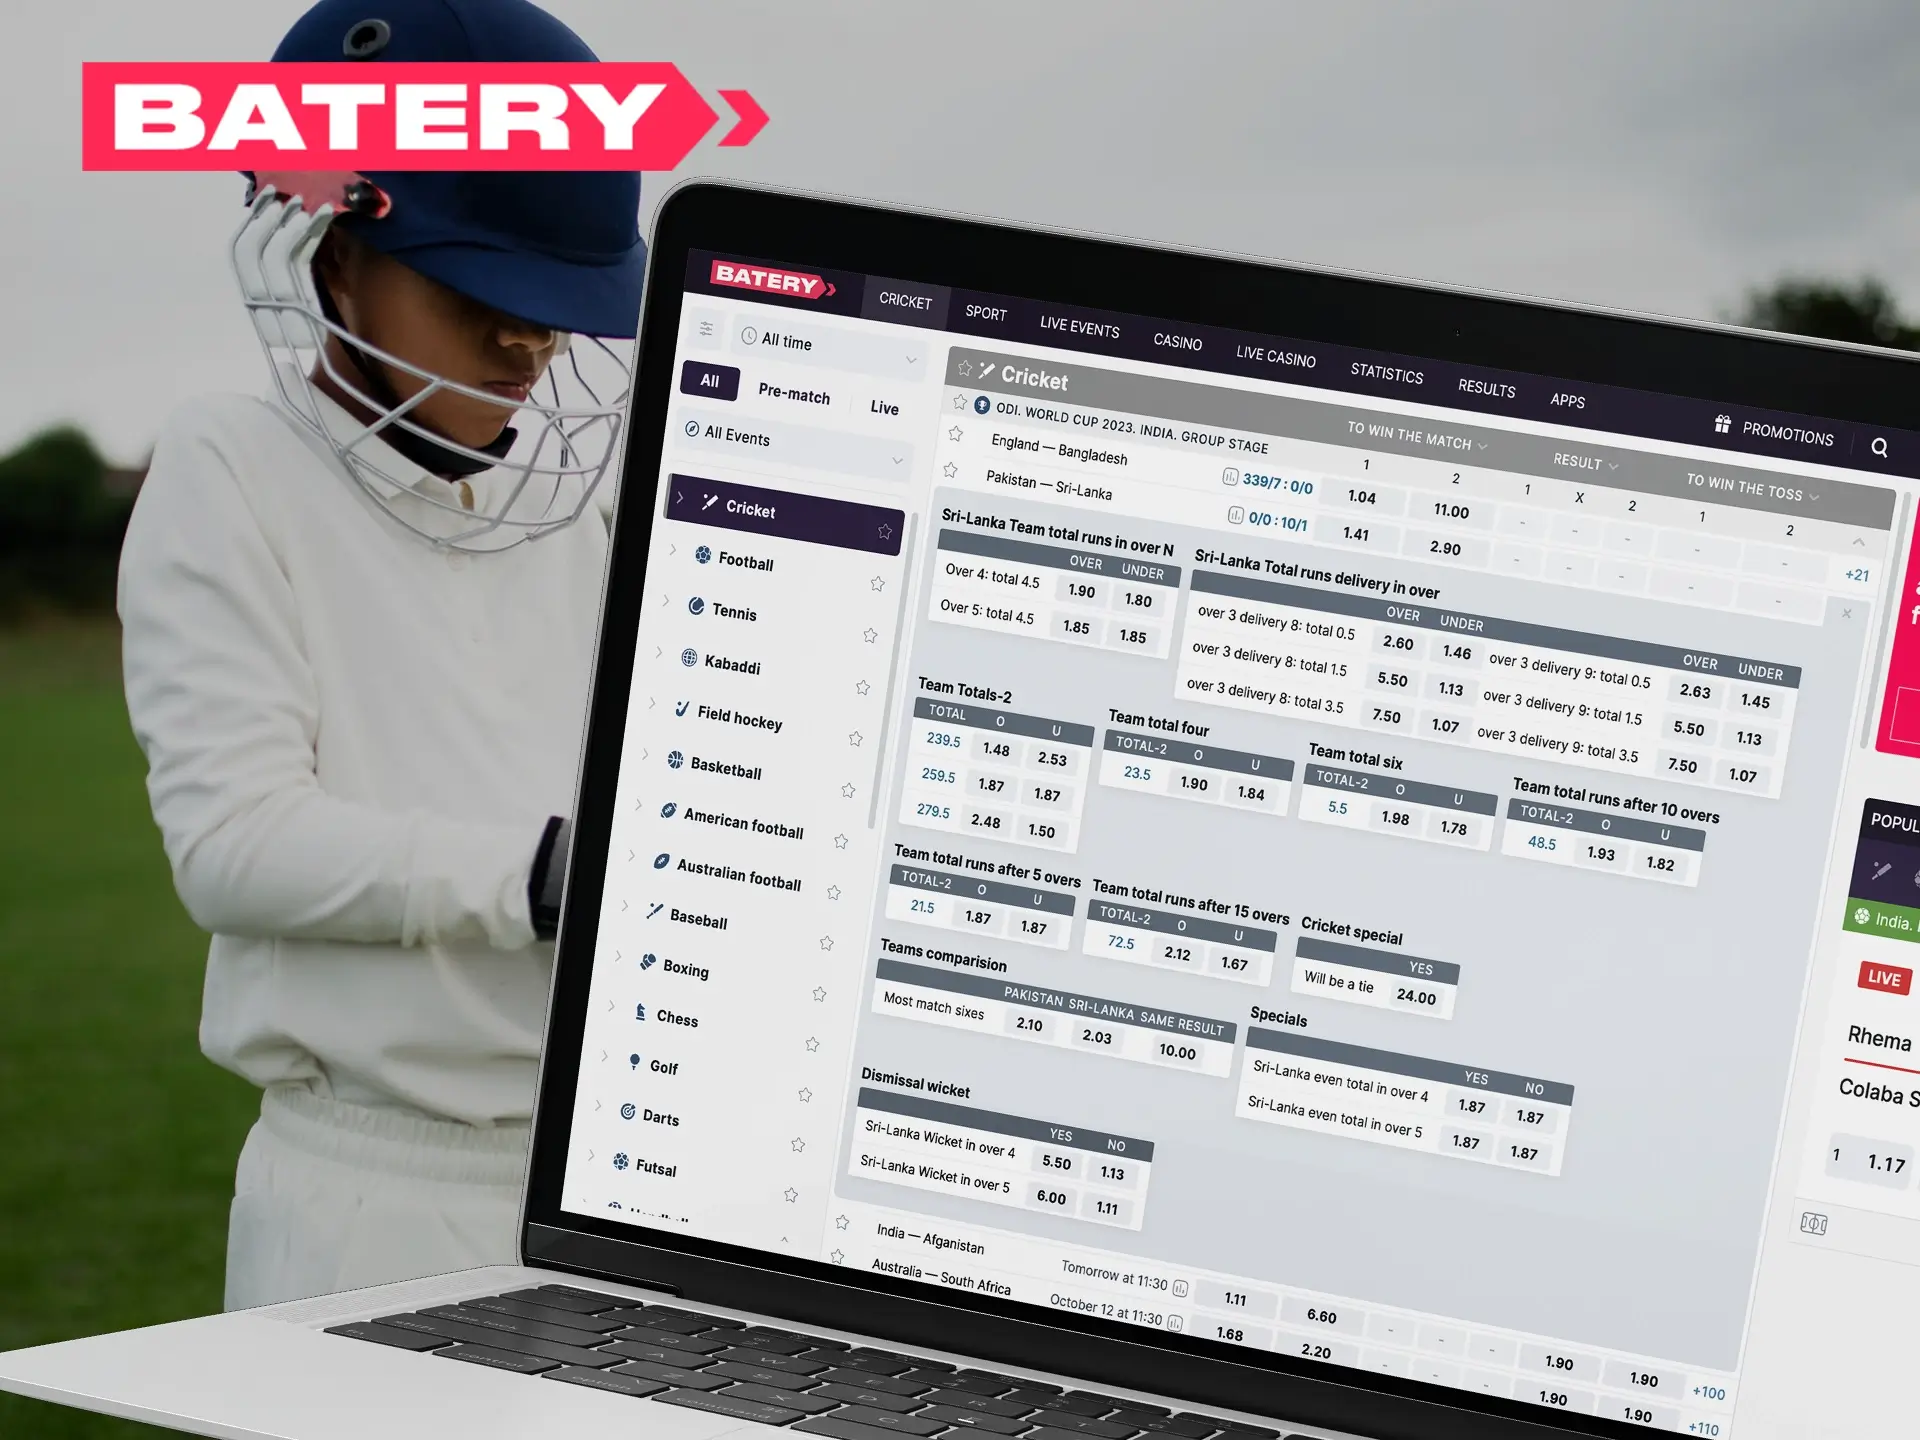 In addition to the main bets at Batery, you'll find plenty of other outcomes.